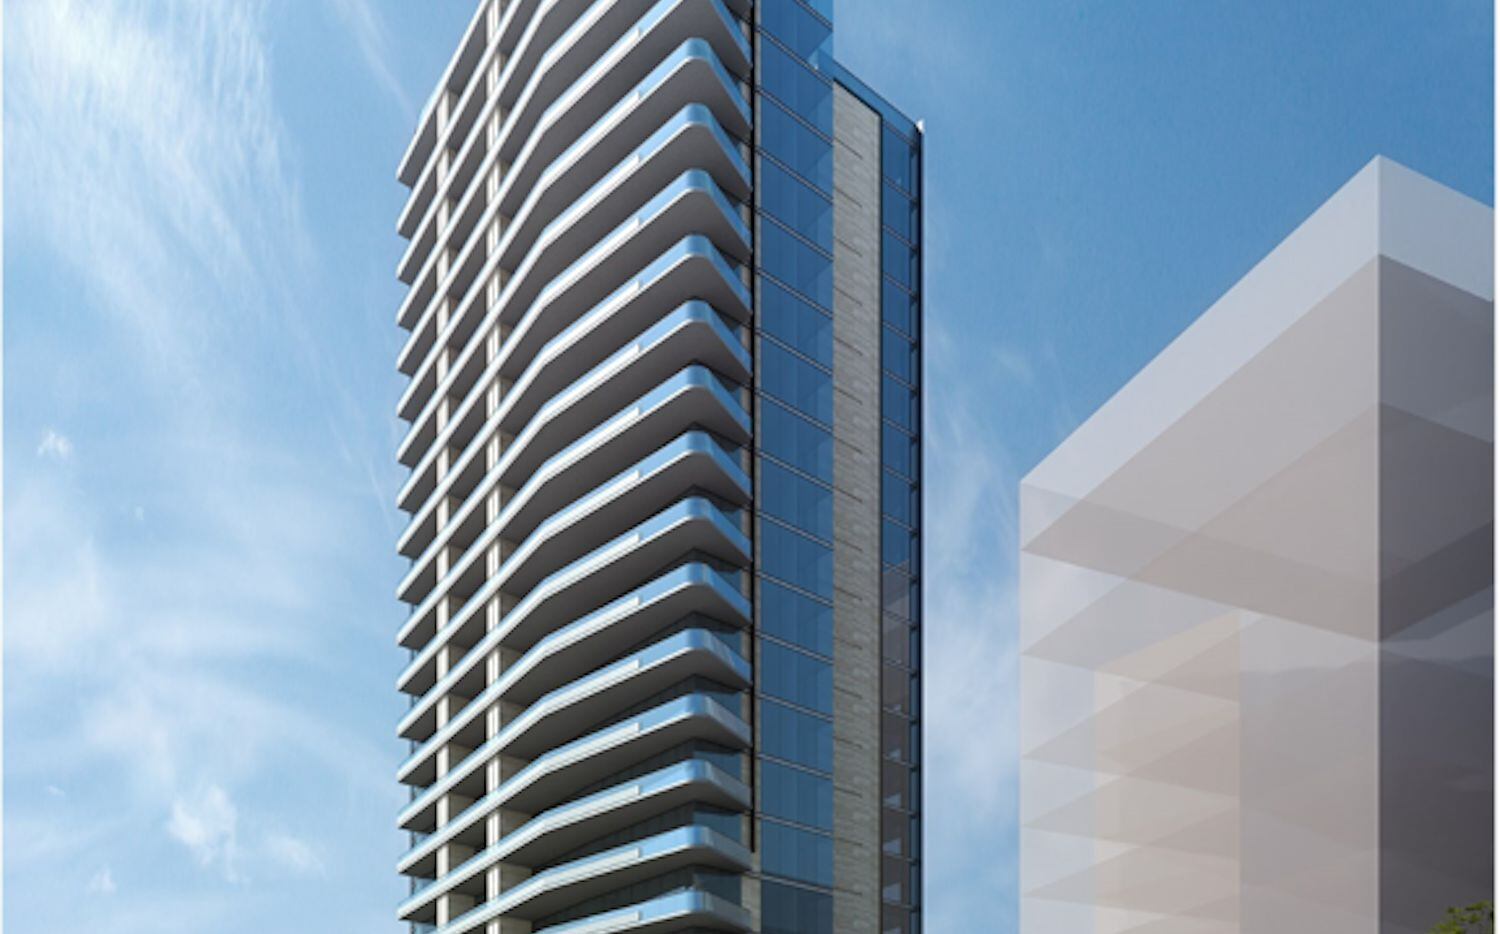 The 24-story Windrose Tower is part of the $3 billion Legacy West development in Plano.